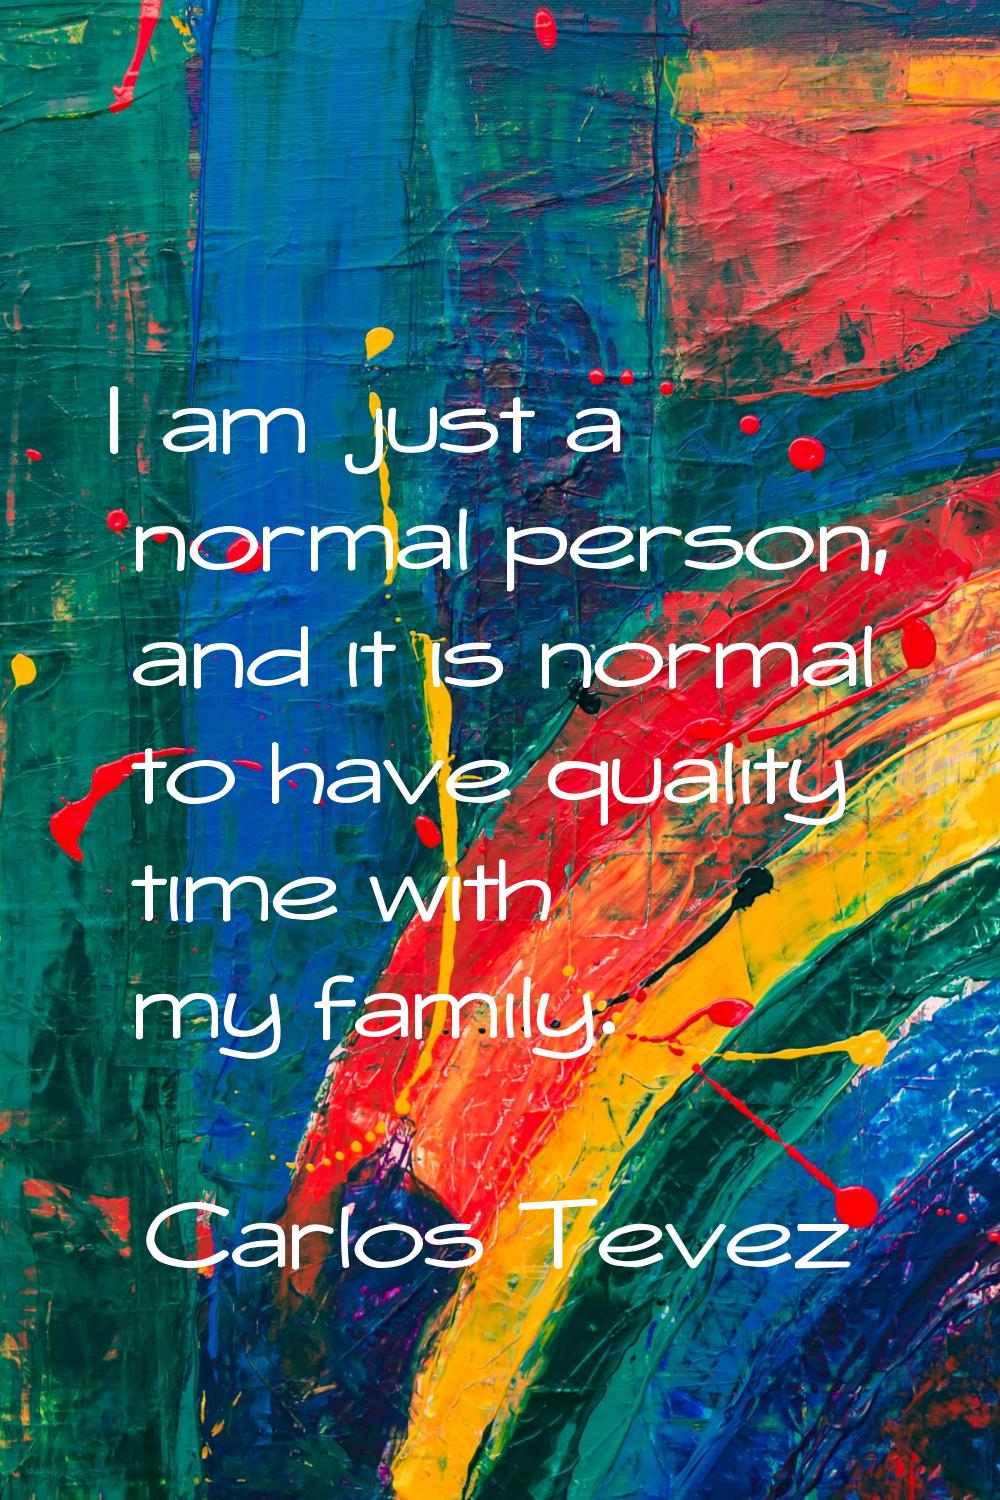 I am just a normal person, and it is normal to have quality time with my family.